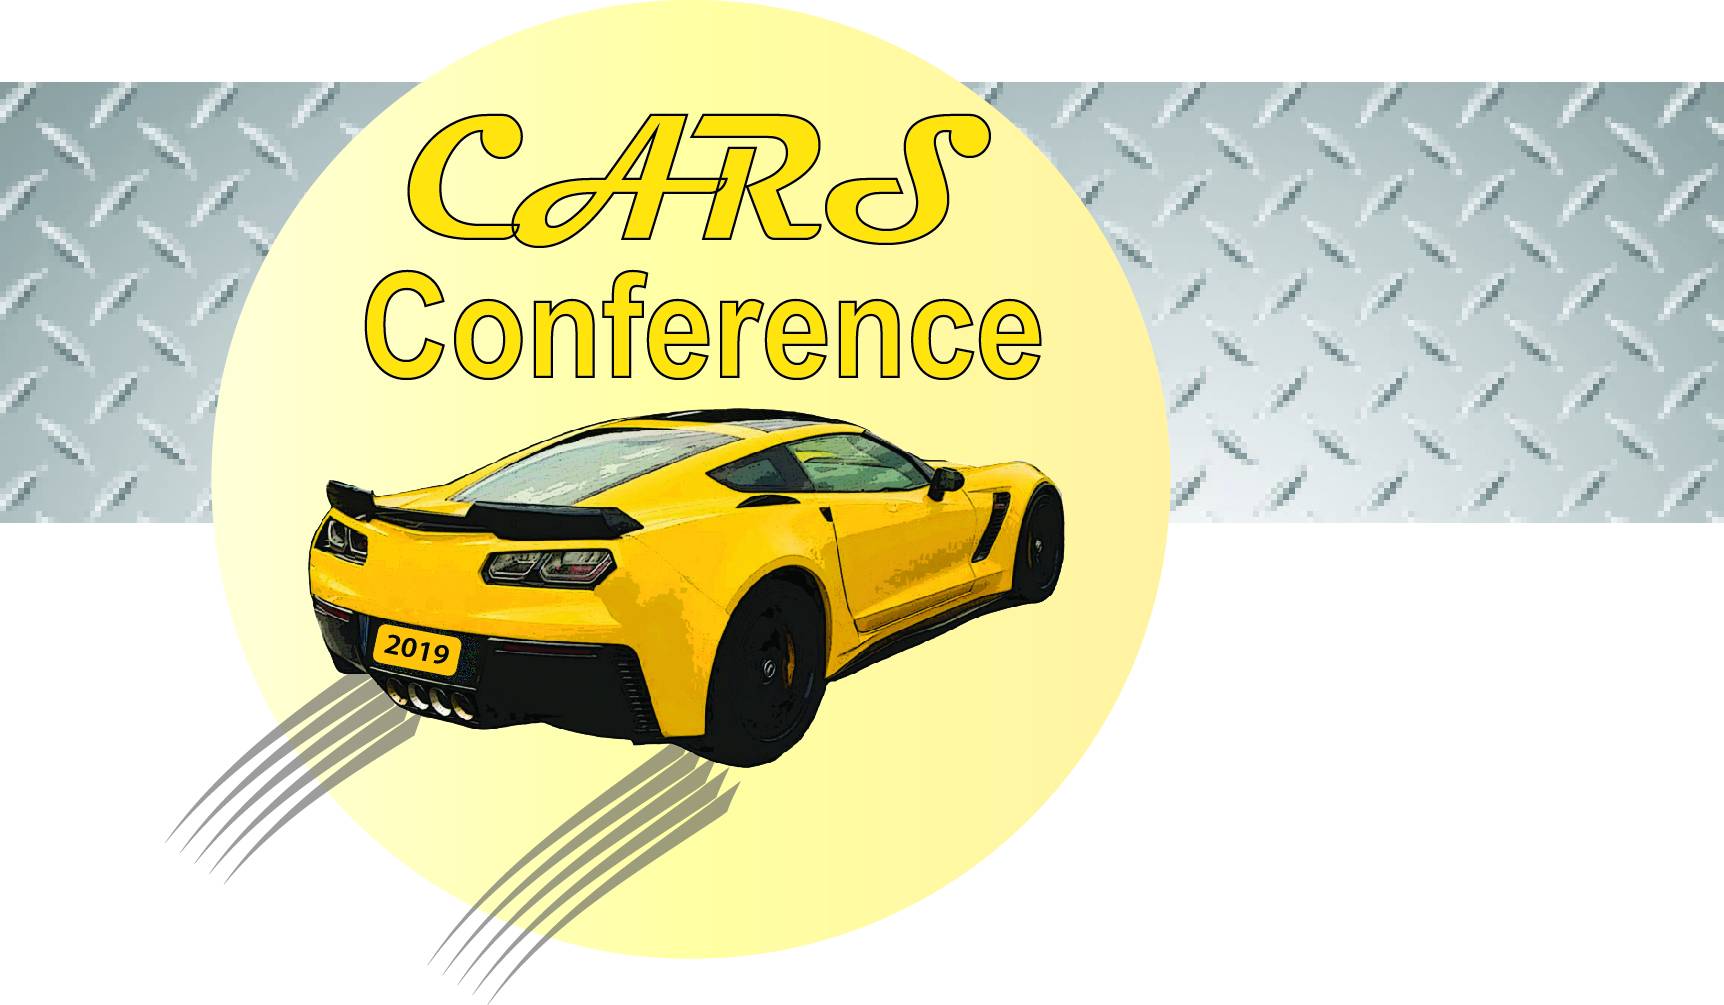 CARS Conference Logo with a Speeding Car